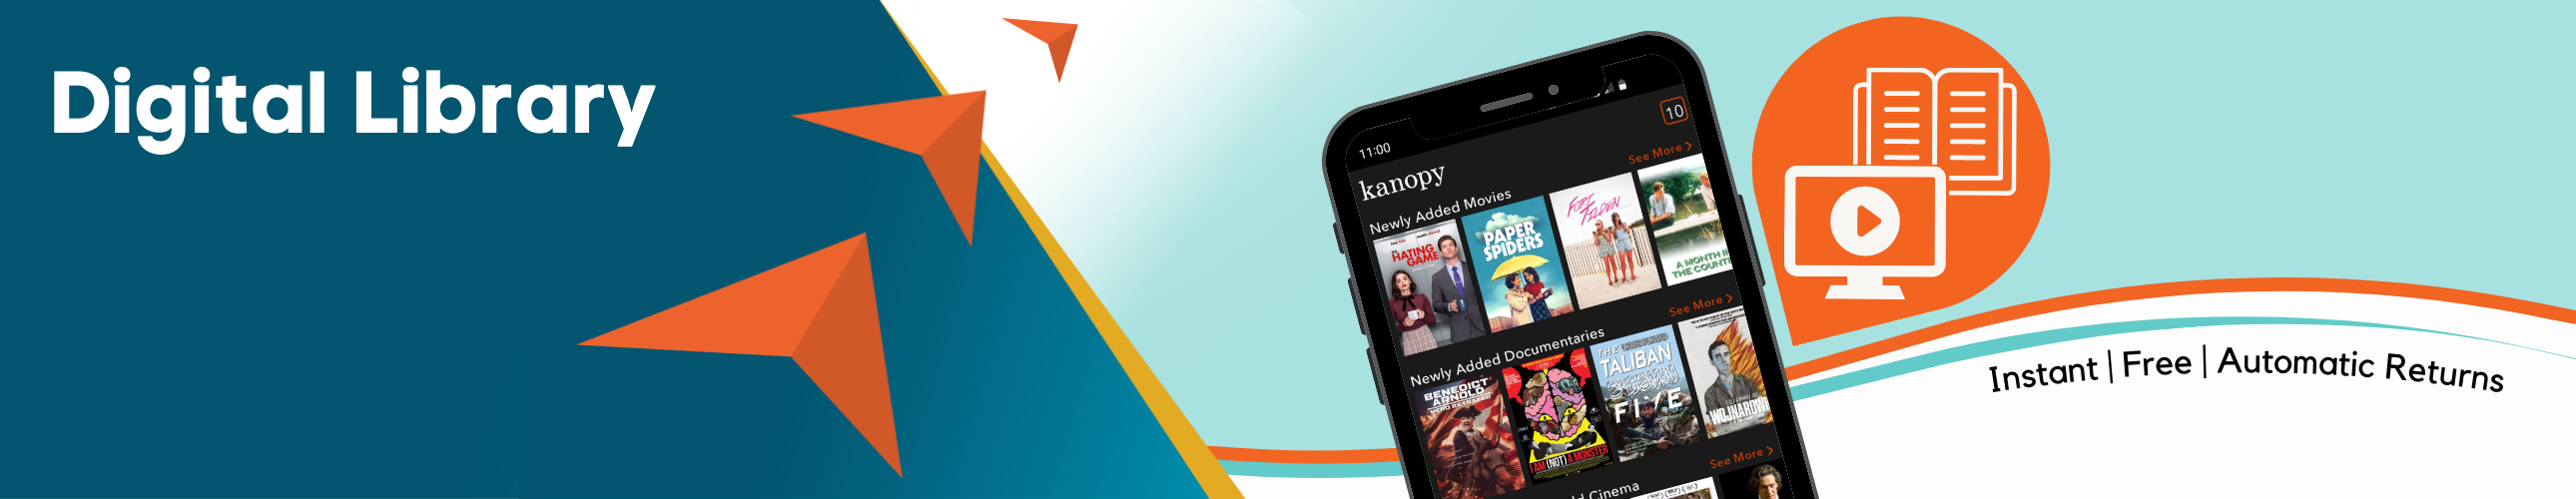 Digital Library banner with orange arrows pointing to cell phone next to movie and book icons. 